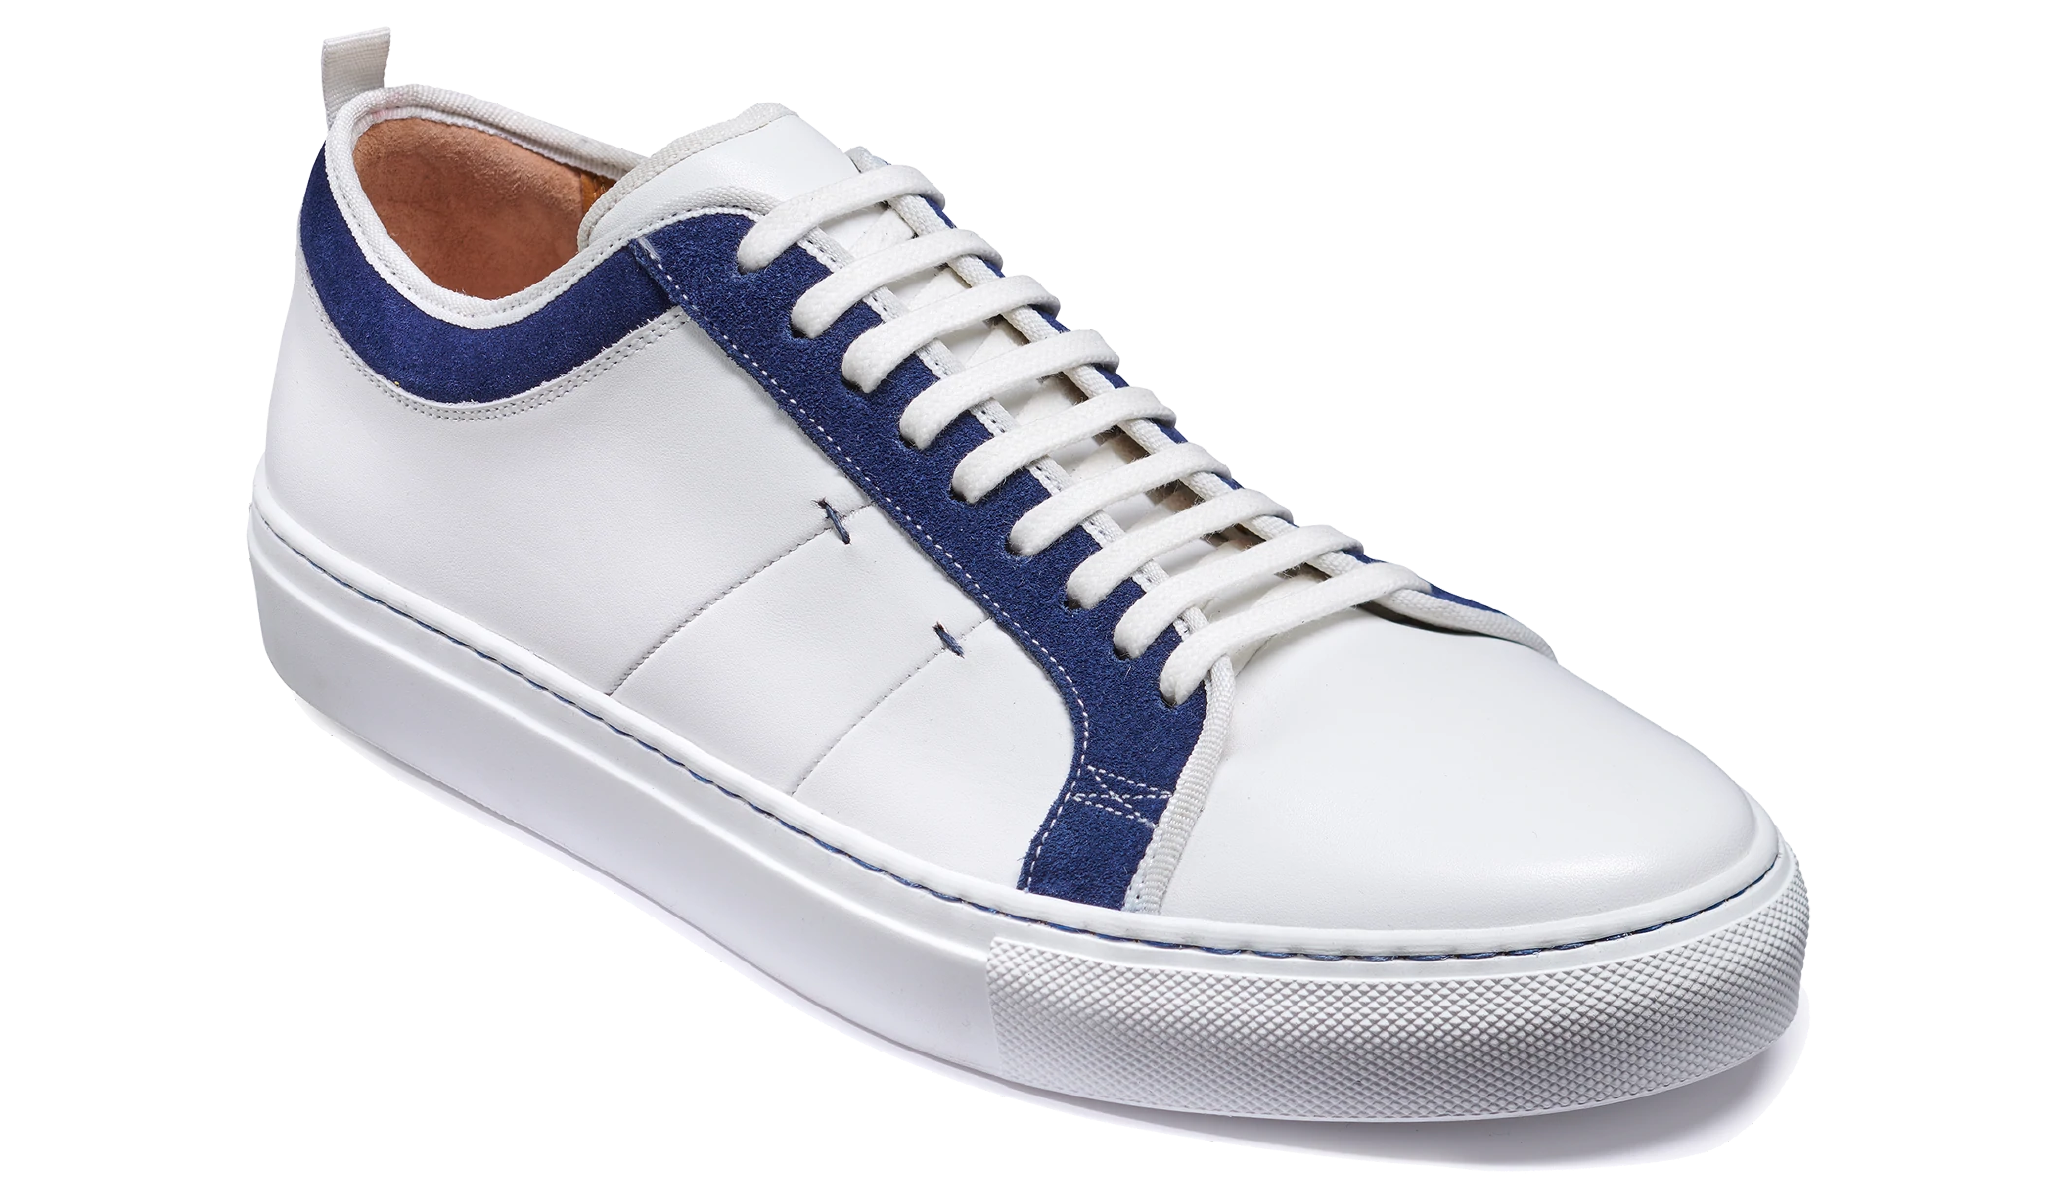 Greg - White Calf / Navy Suede | Barker Shoes UK